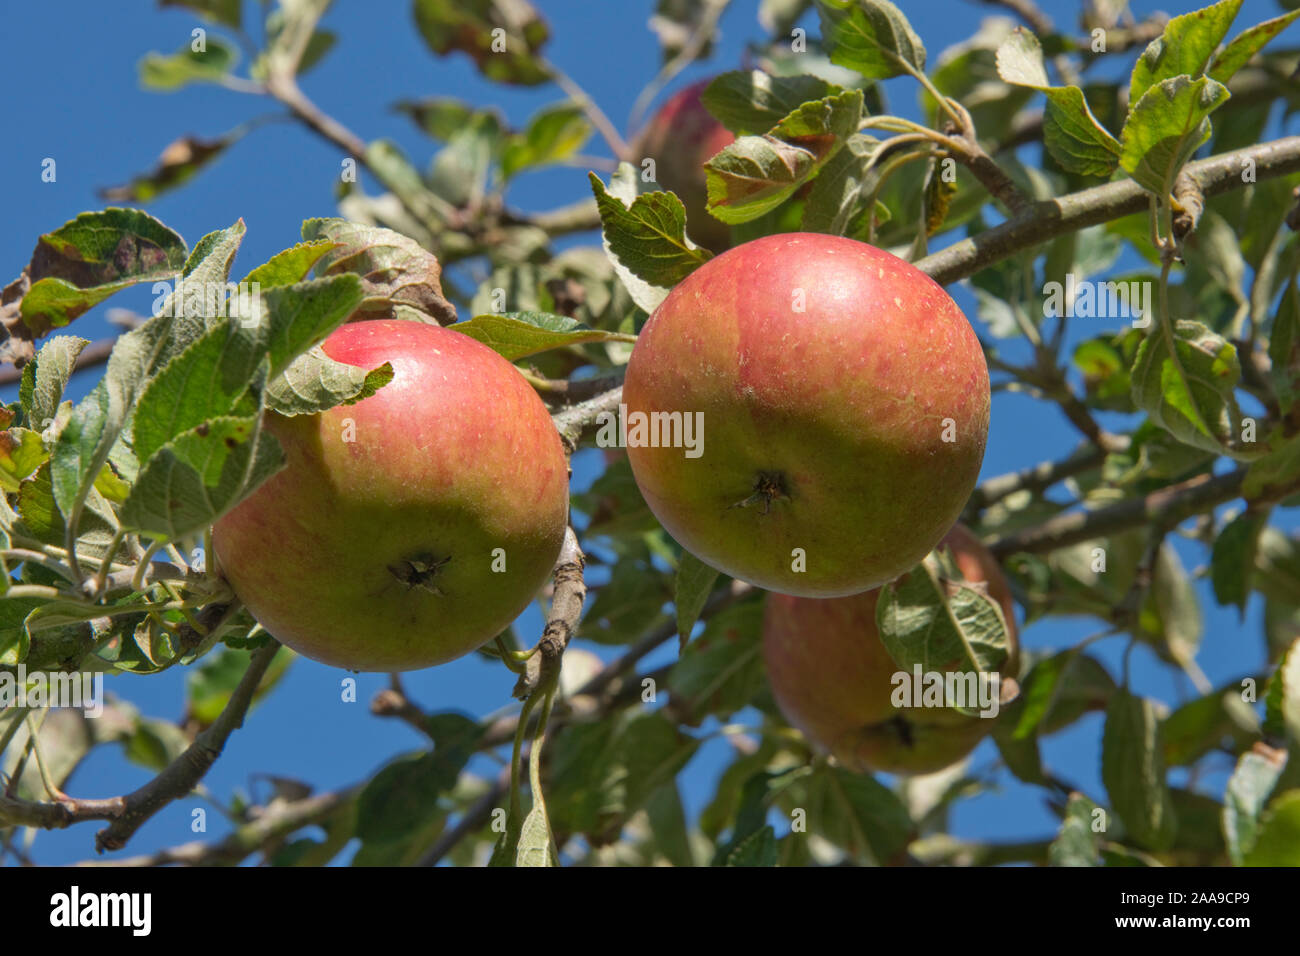 Ripe red cox's orange pippin apple fruit on the tree in late summer, Berkshire, September Stock Photo